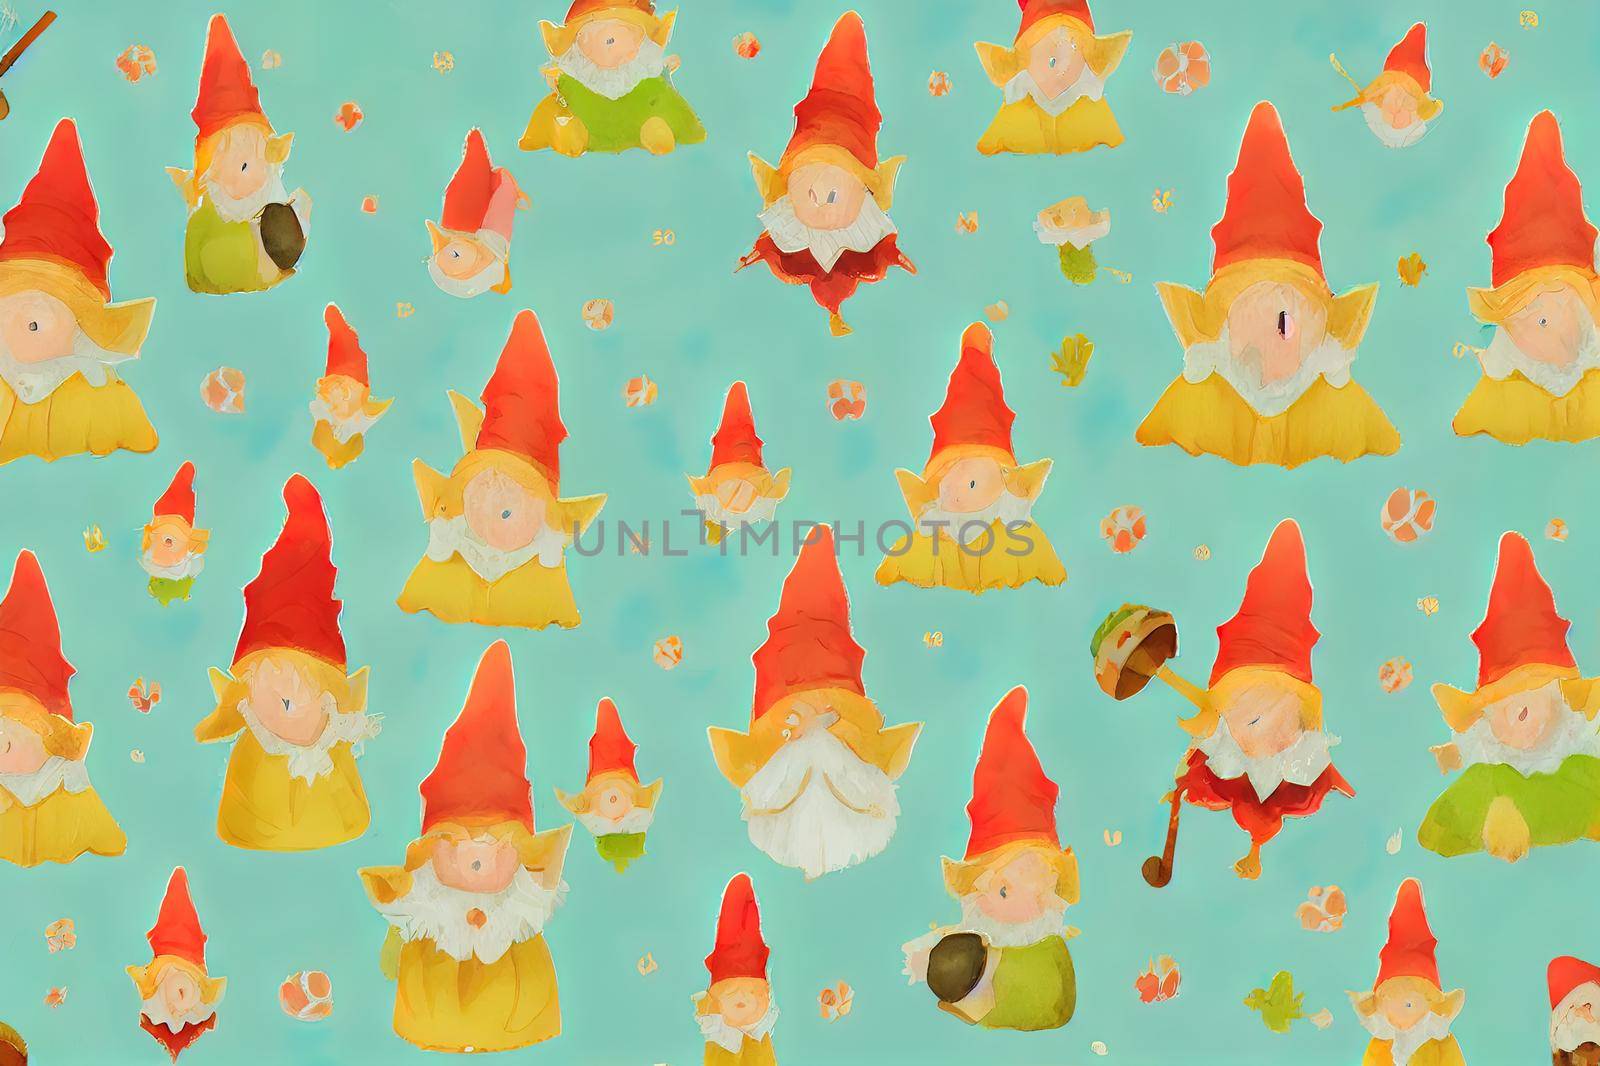 Cute digital painting watercolor gnomes elementisolated gnome on white backgroundcartoon character hand drawndesign for texturefabricclothingstickerscrapbookdecoratingHalloween concept